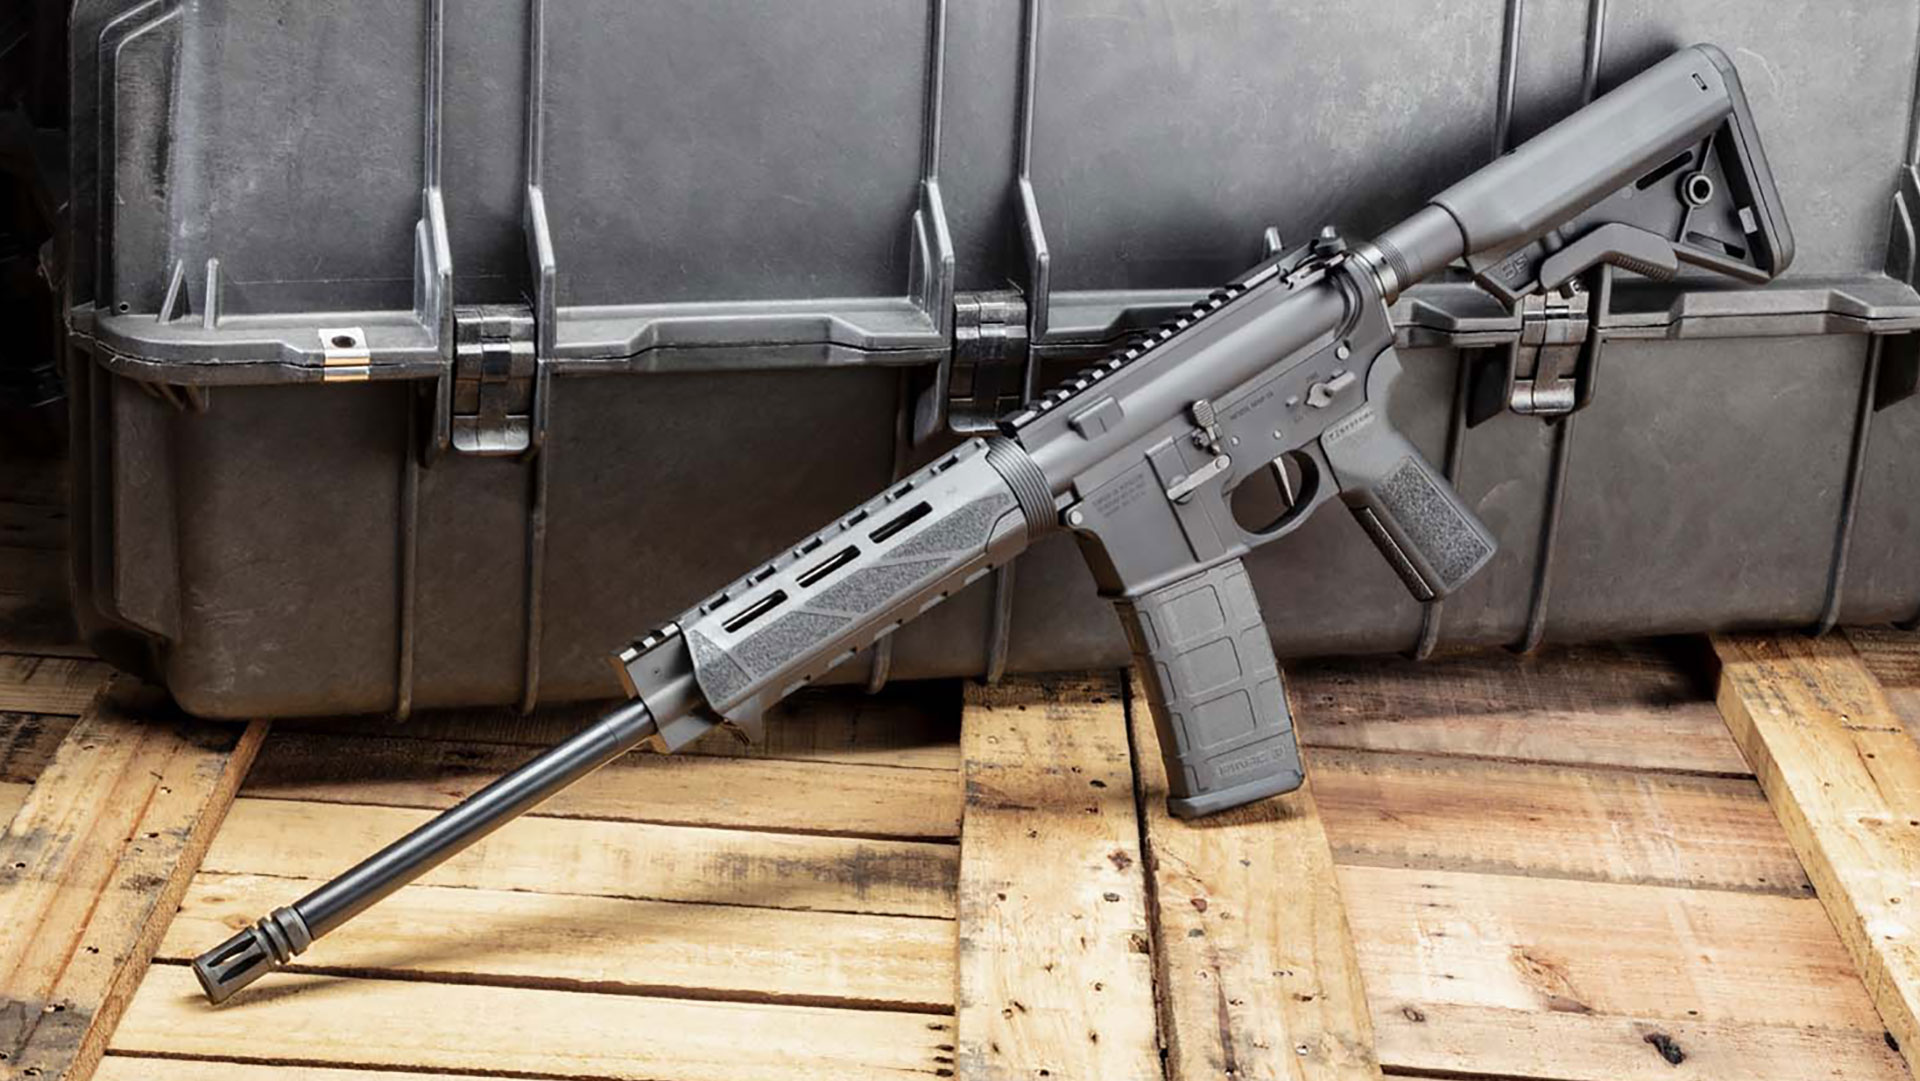 First Impressions: Mission First Tactical AR-15 Muzzle Devices